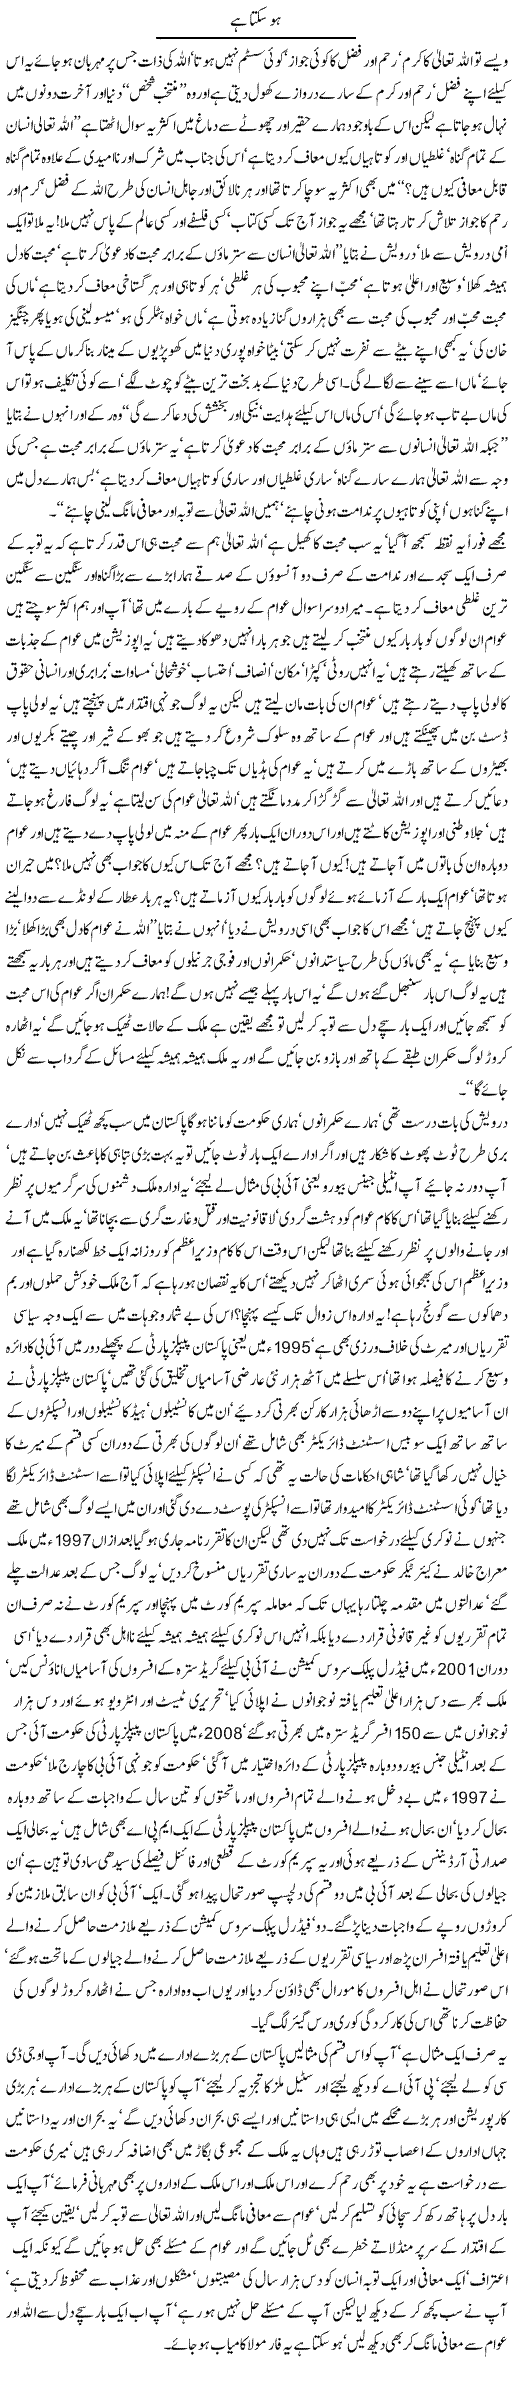 Possible Express Column Javed Chaudhry 1 October 2010